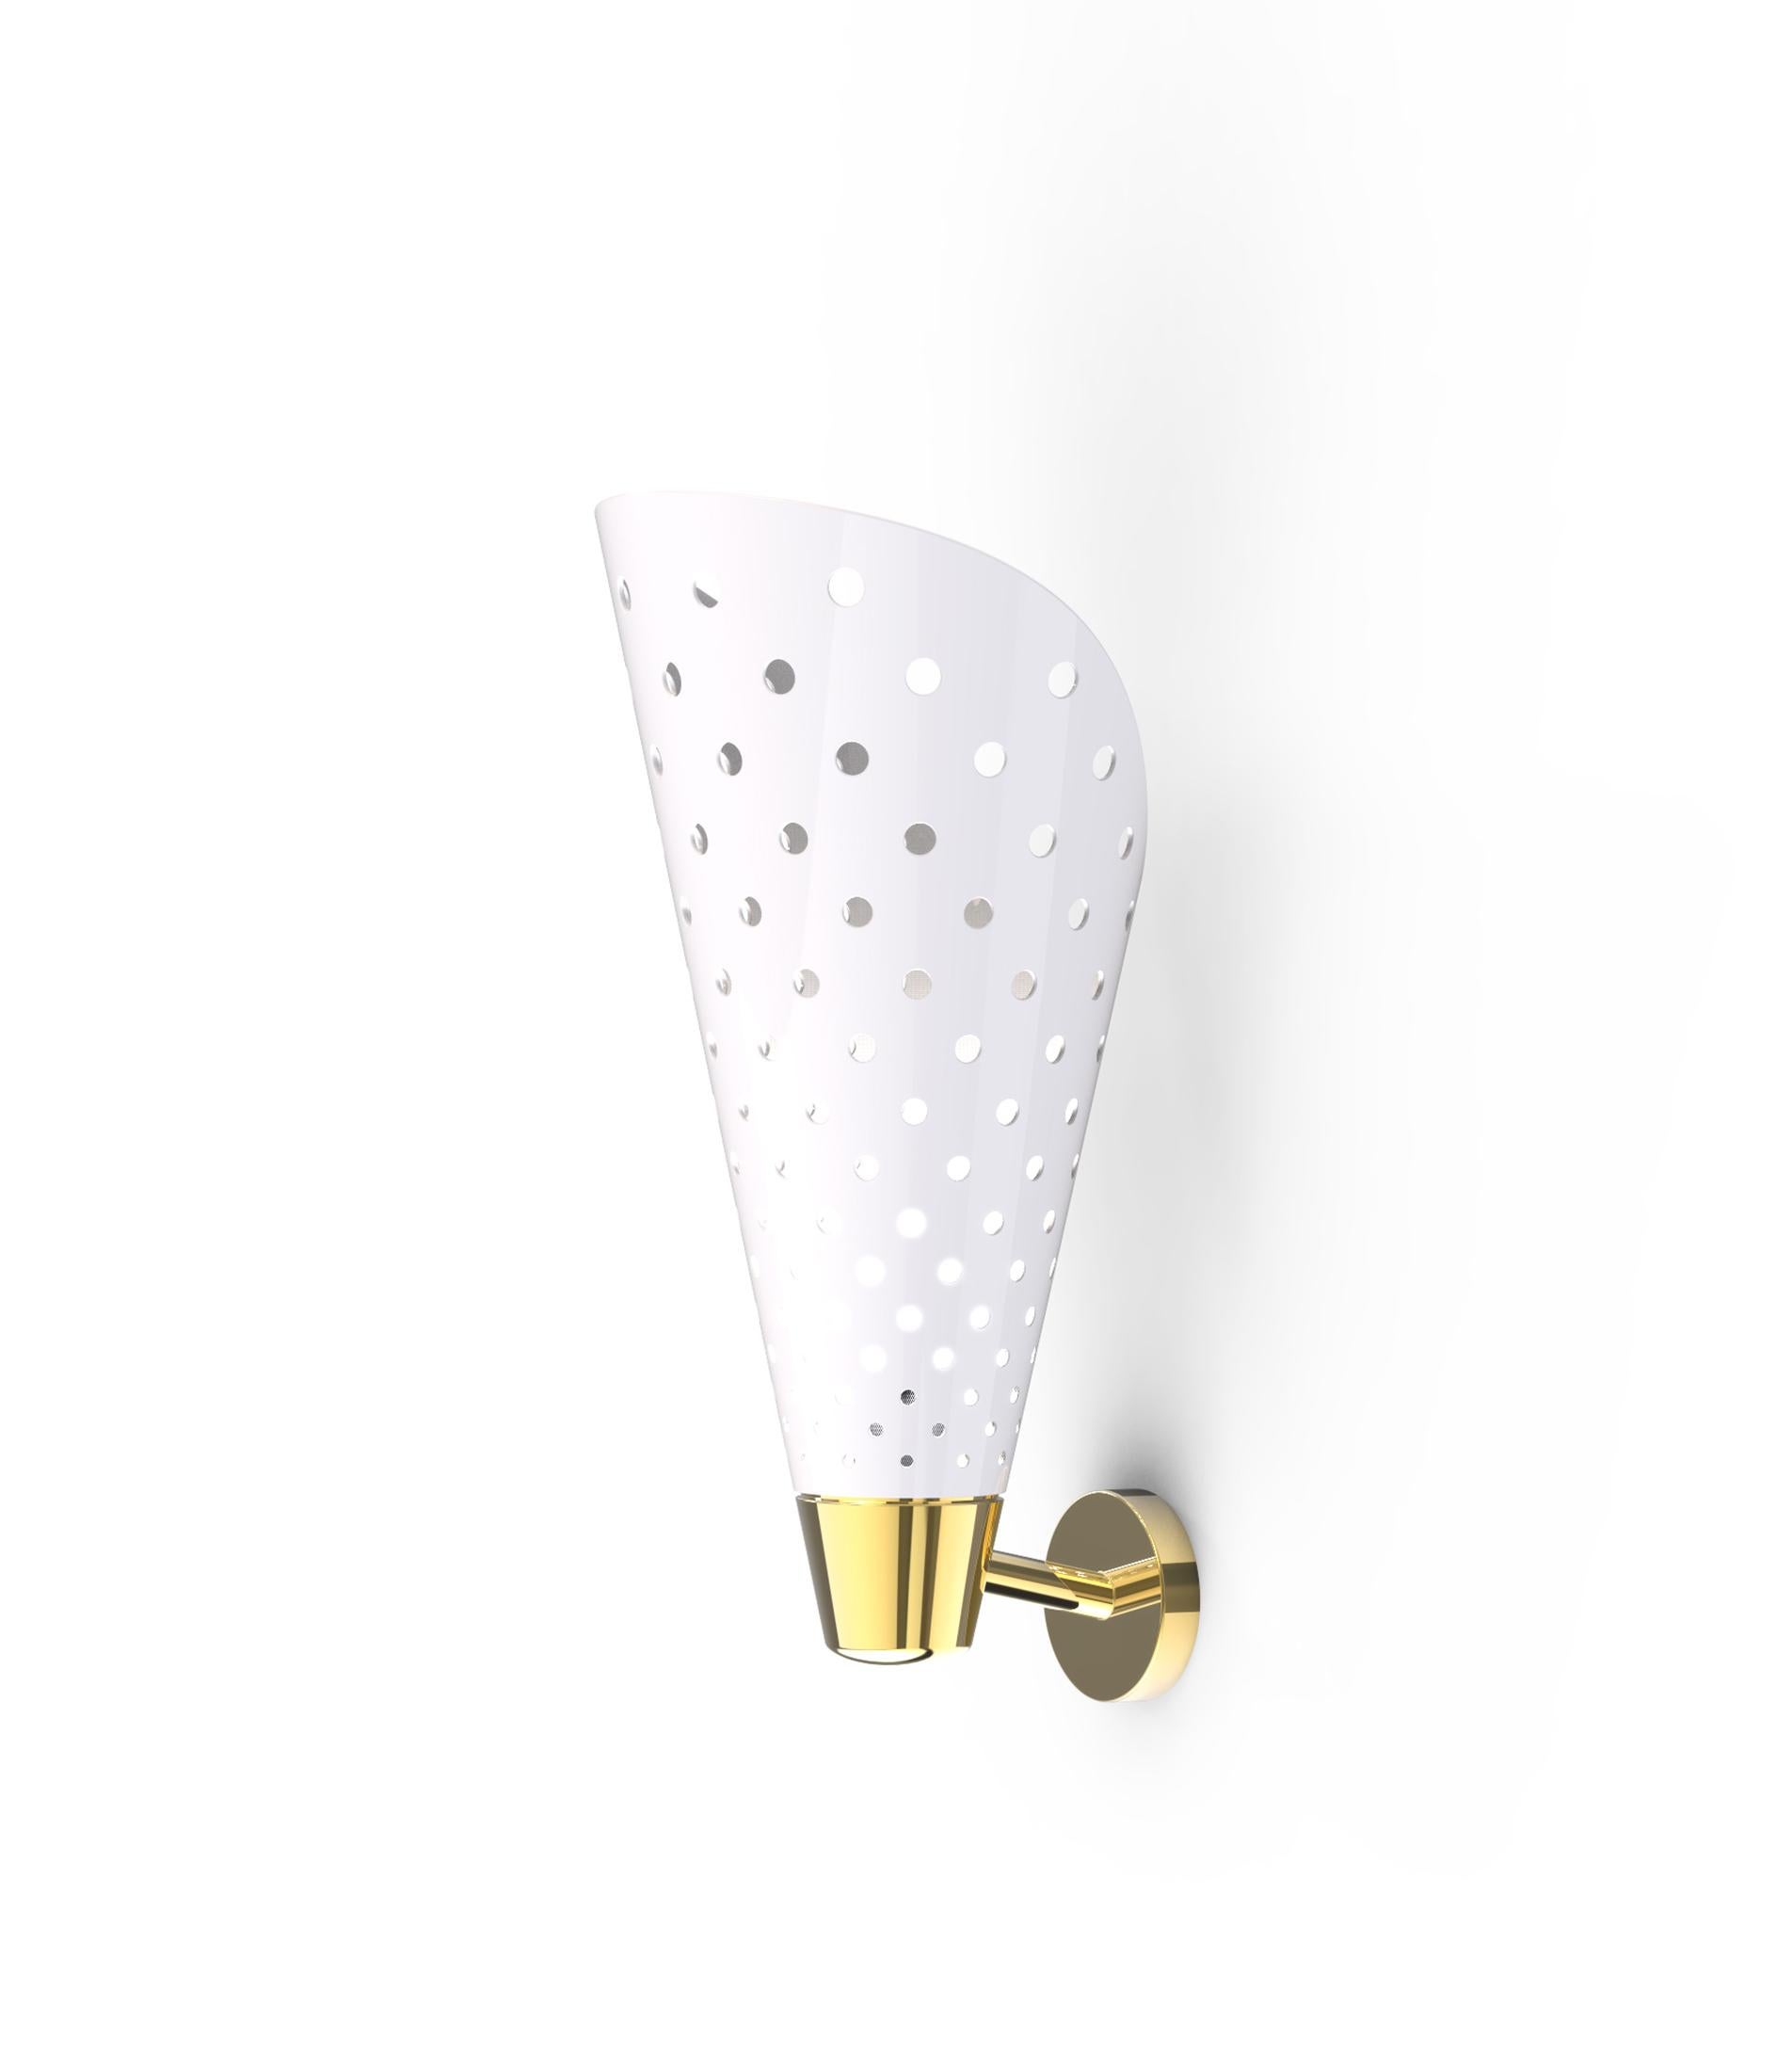 A modern-day interpretation of the Mid-Century Modern lighting designs produced in the 1950s and 1960s, Dizzy wall sconce is 100% designed and handmade in Portugal. This Stilnovo lighting design is built in brass, with nickel plated and glossy white